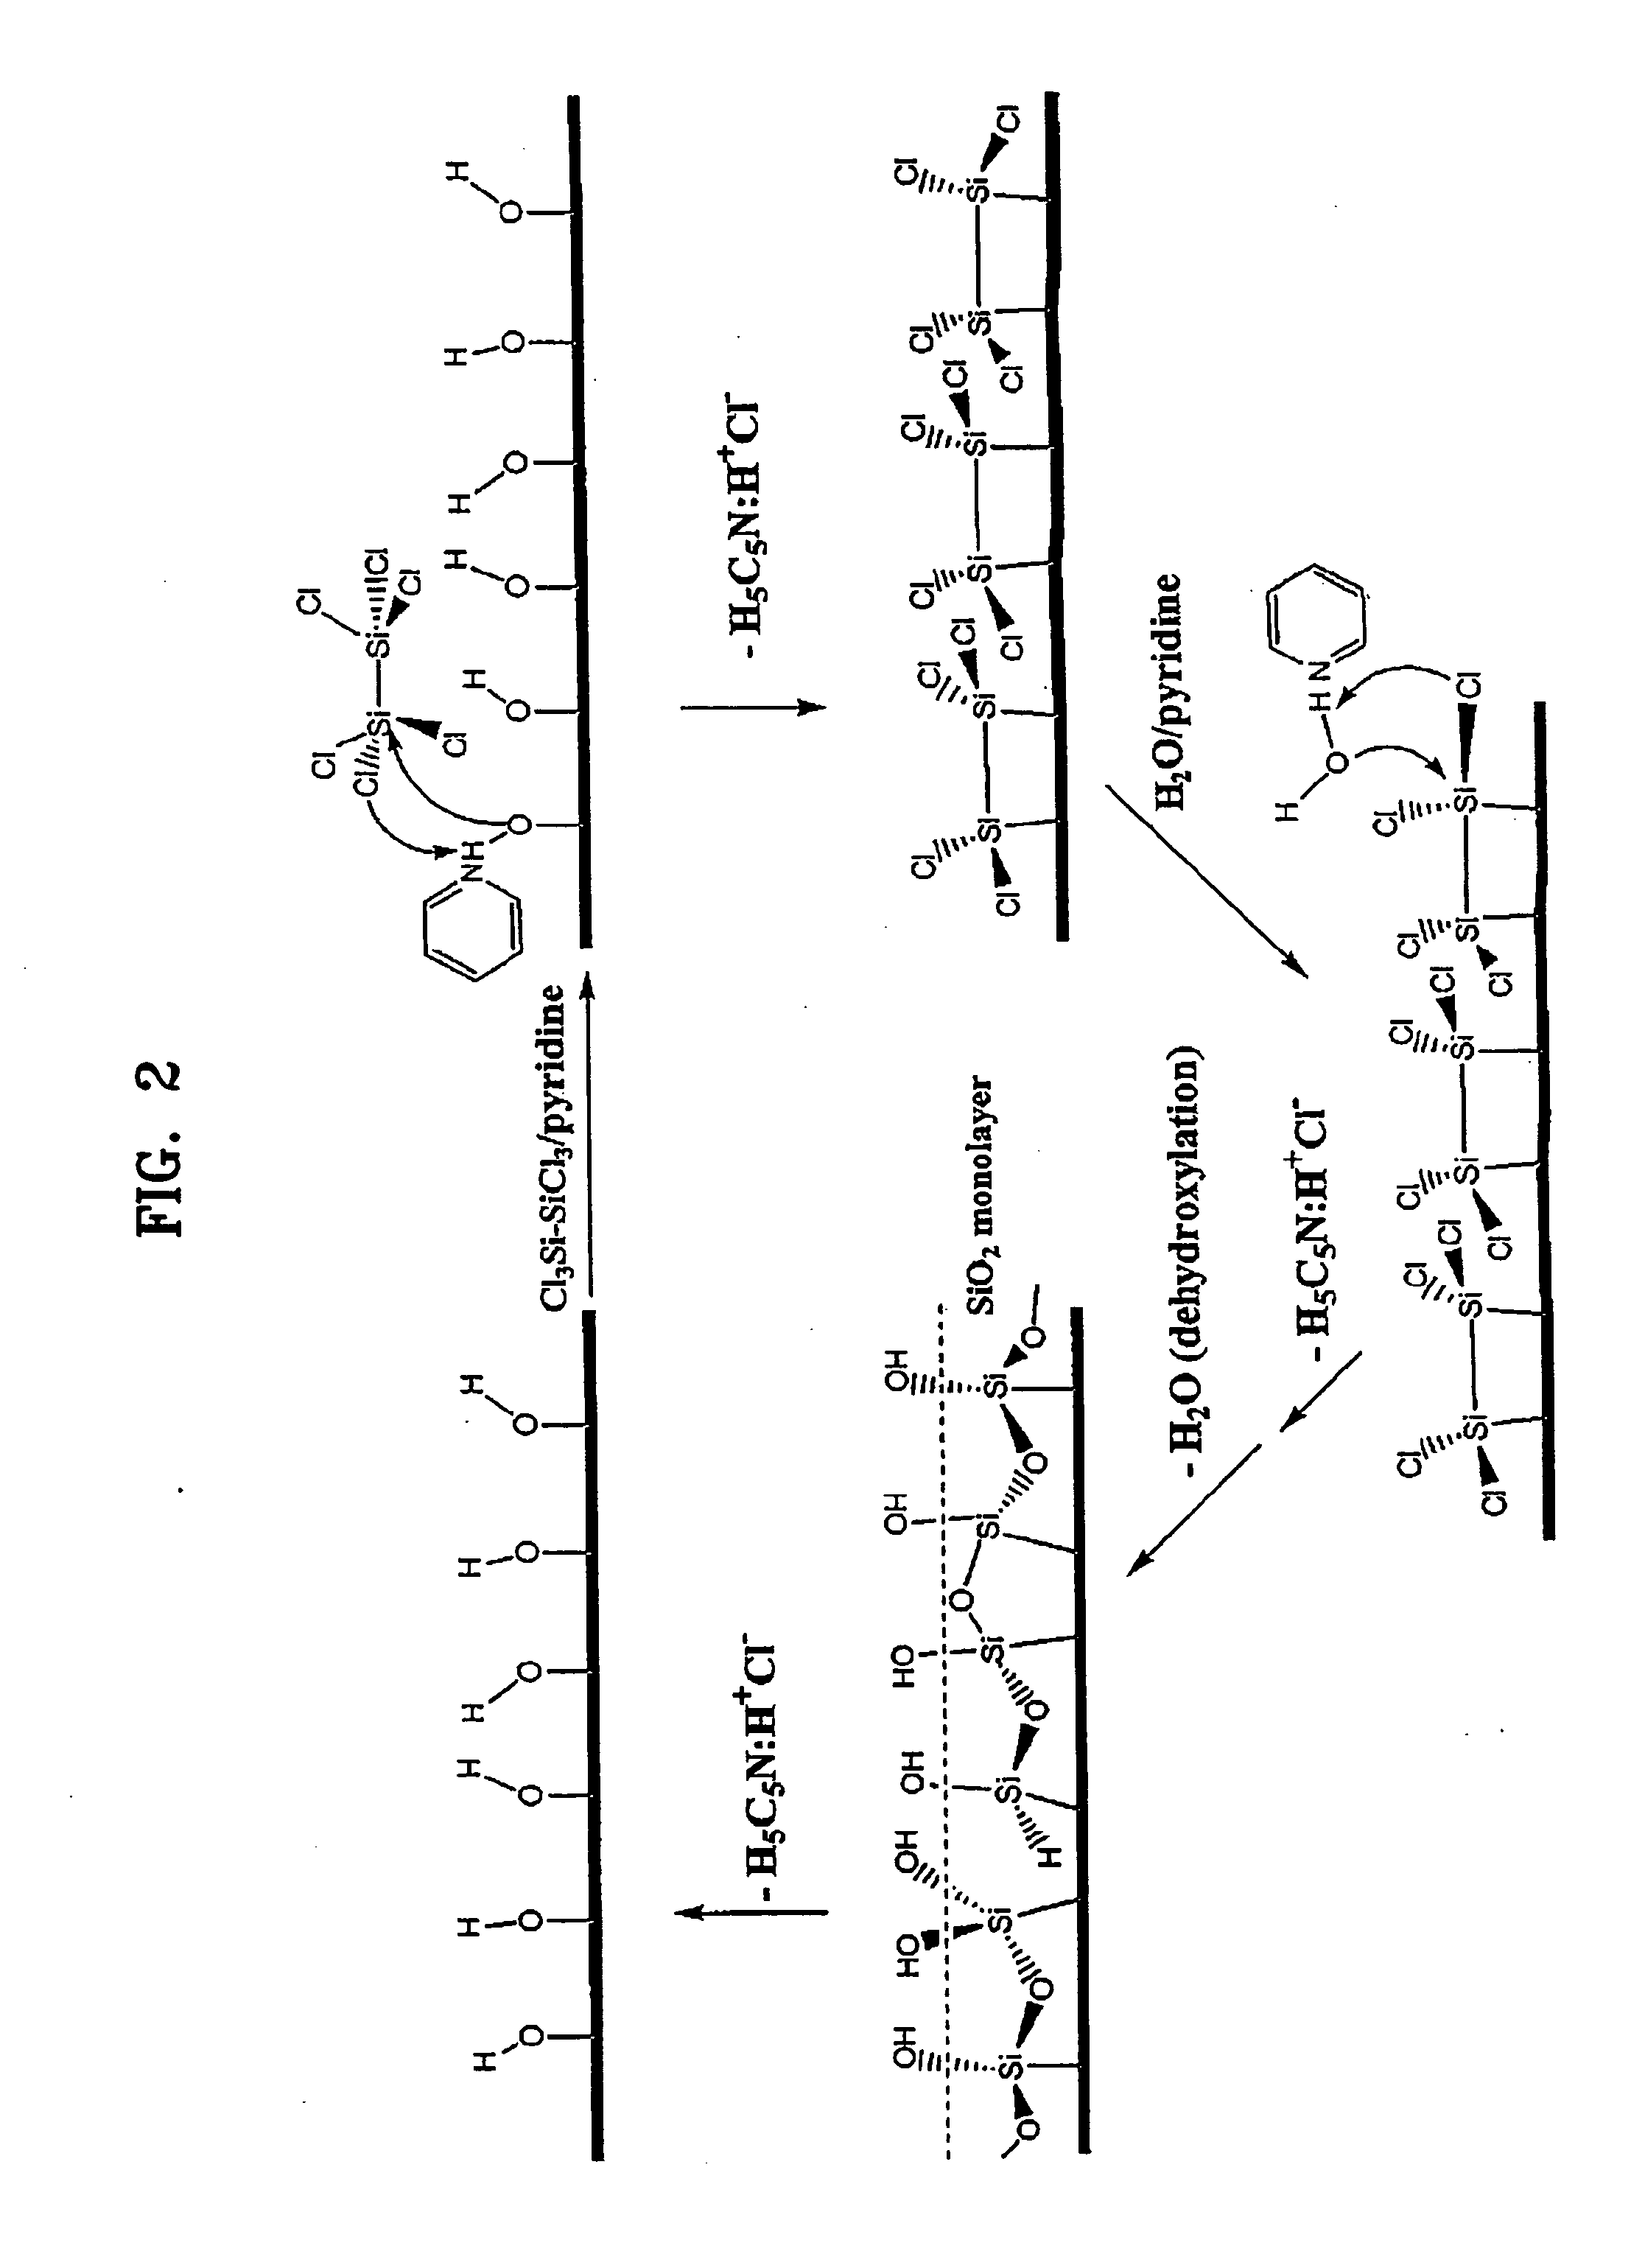 Semiconductor device with silicon dioxide layers formed using atomic layer deposition